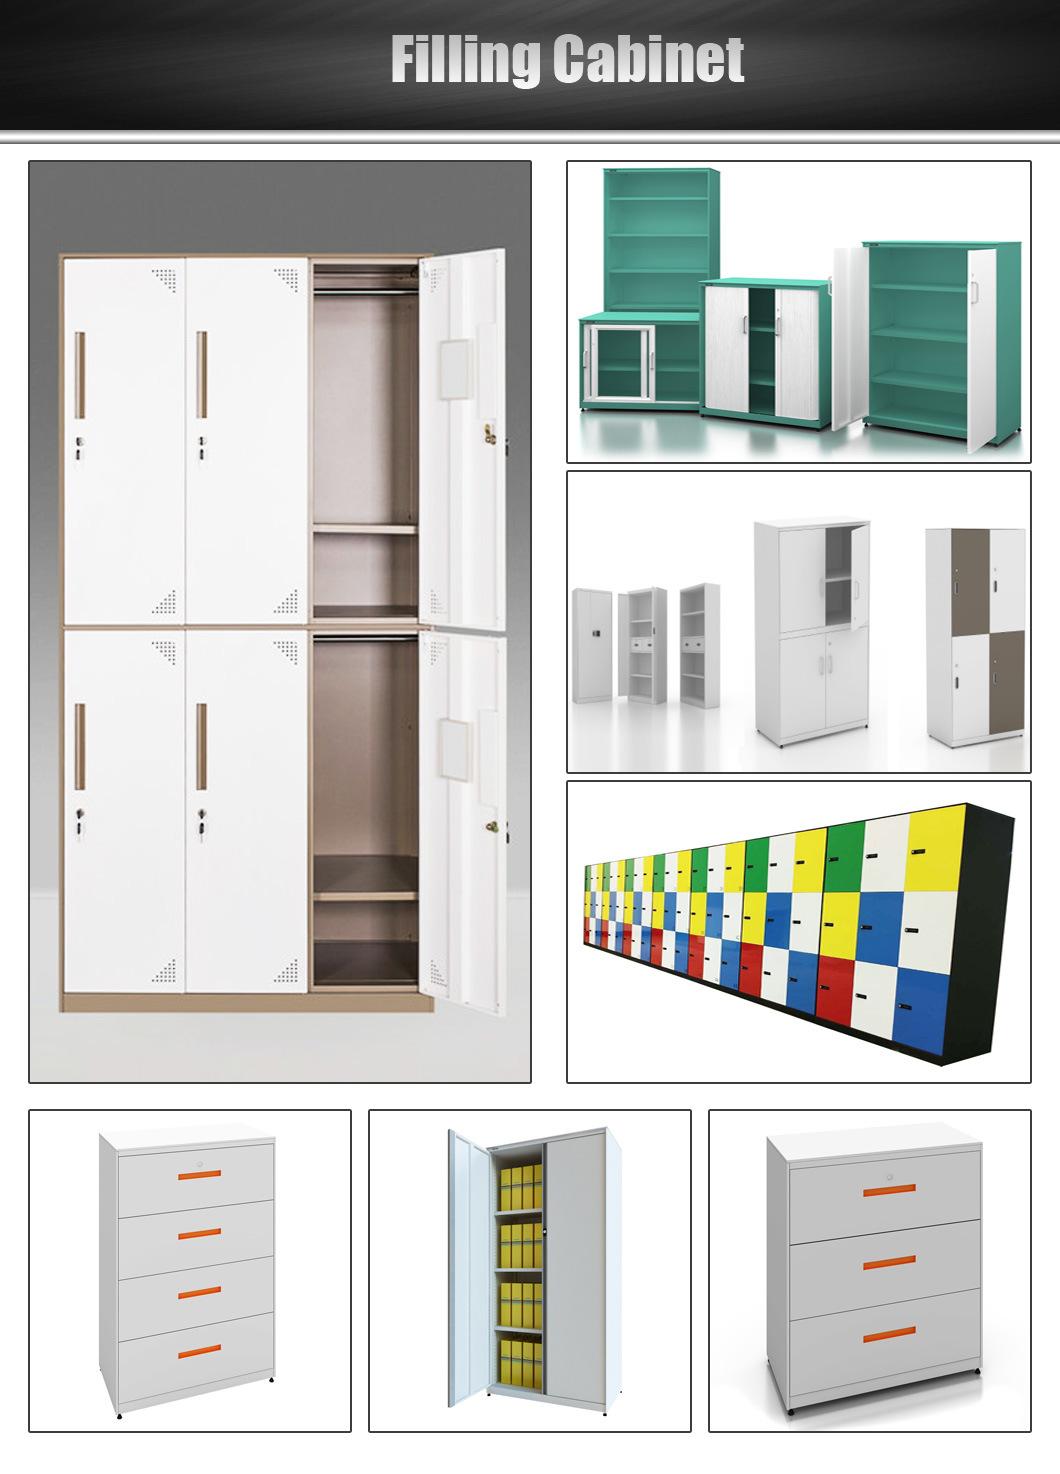 Reliable Steel Locker/Storage Cabinet Office Furniture with Professional Services